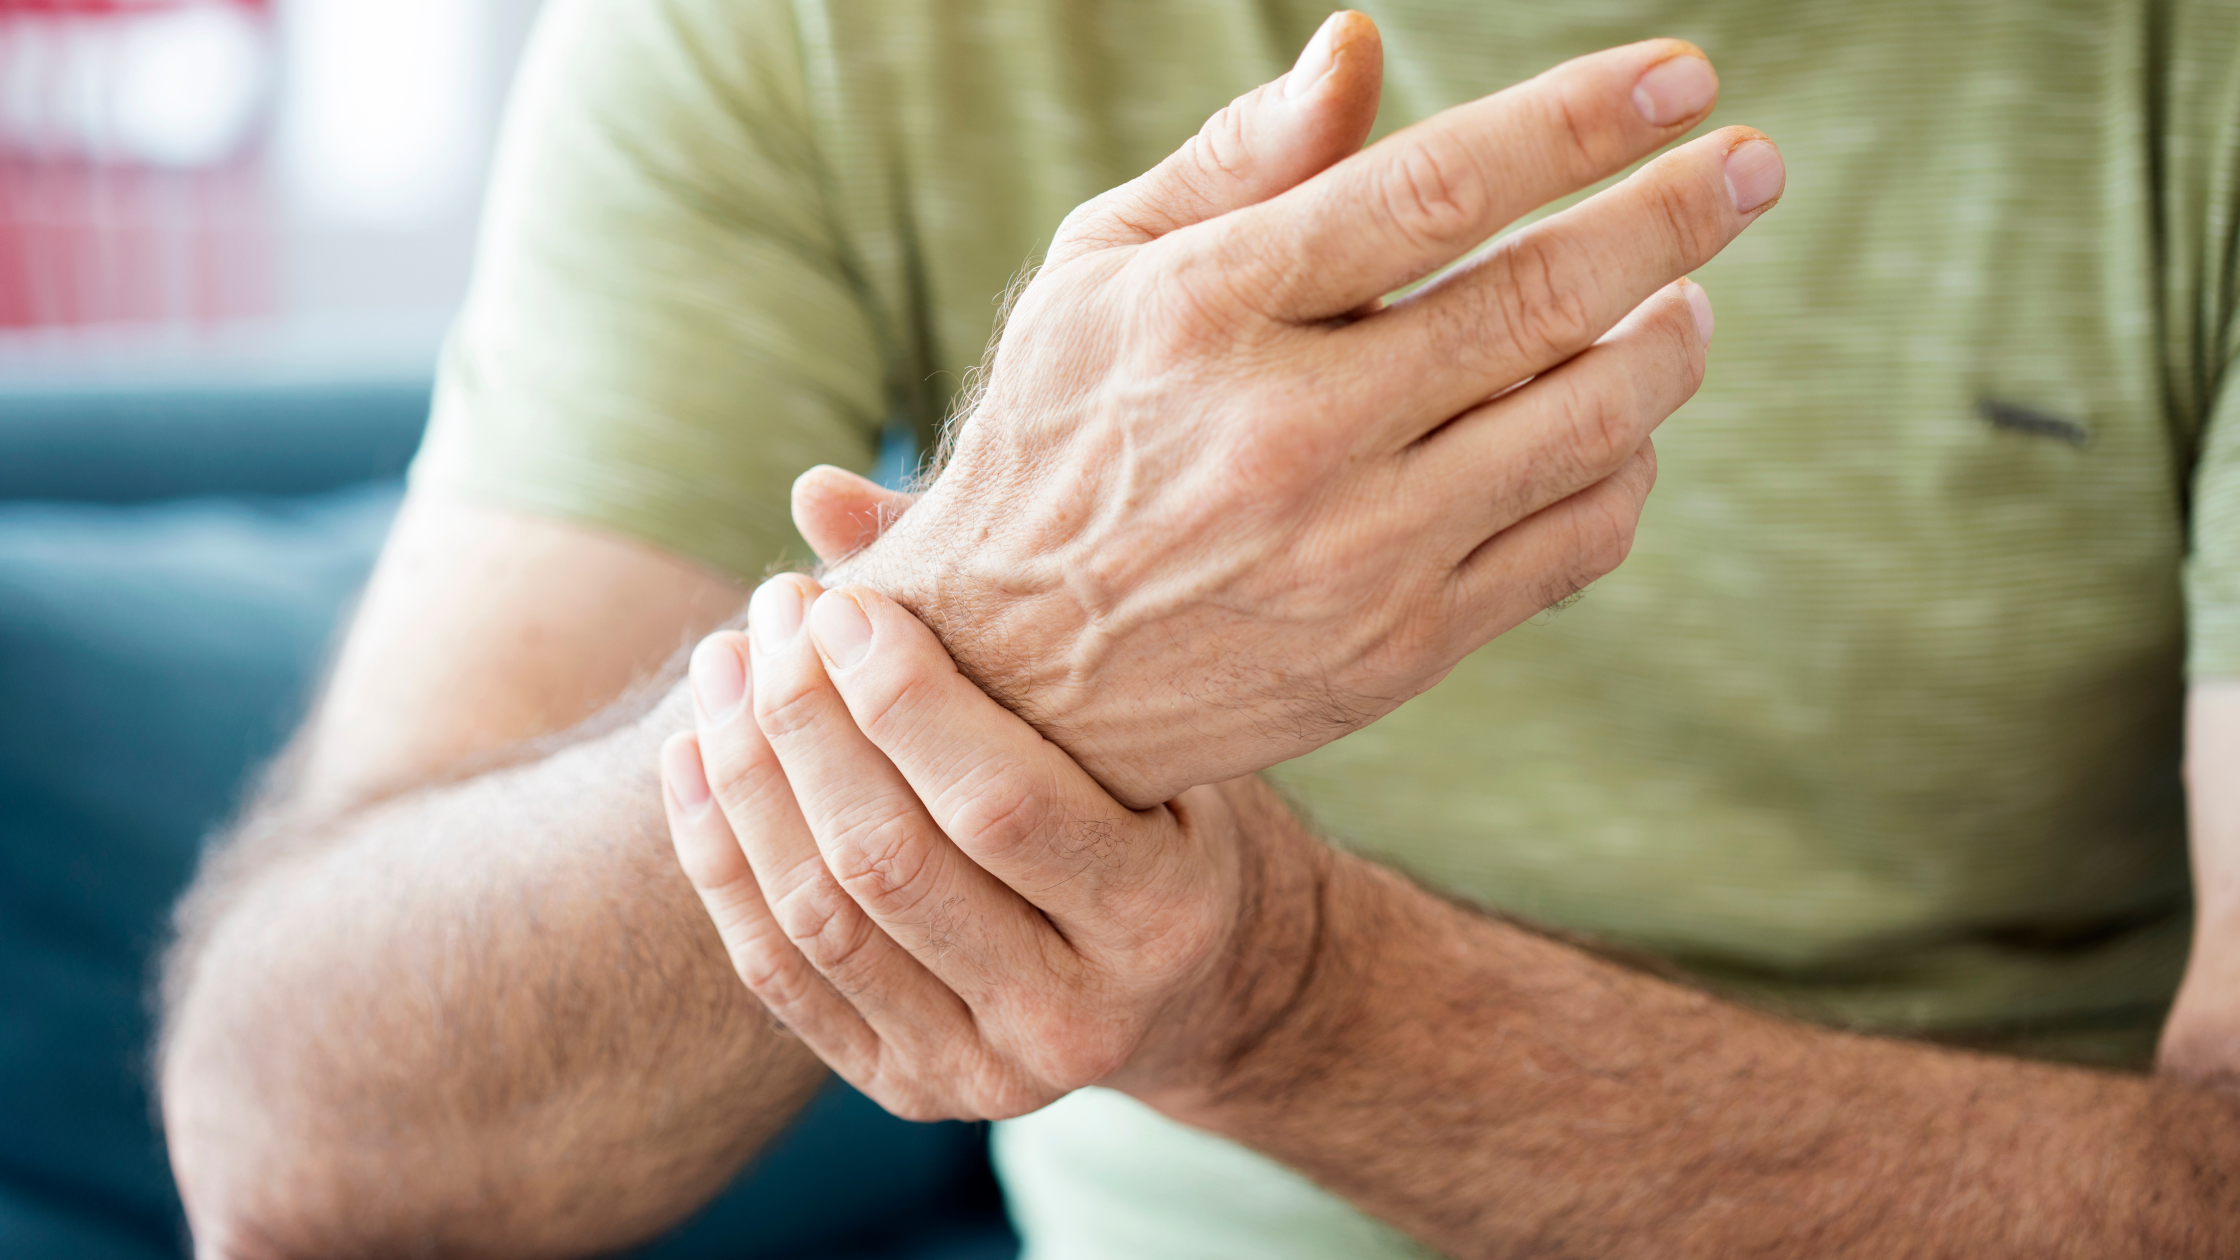 Psoriatic Arthritis: Recognizing The First Signs and Available Treatment Options